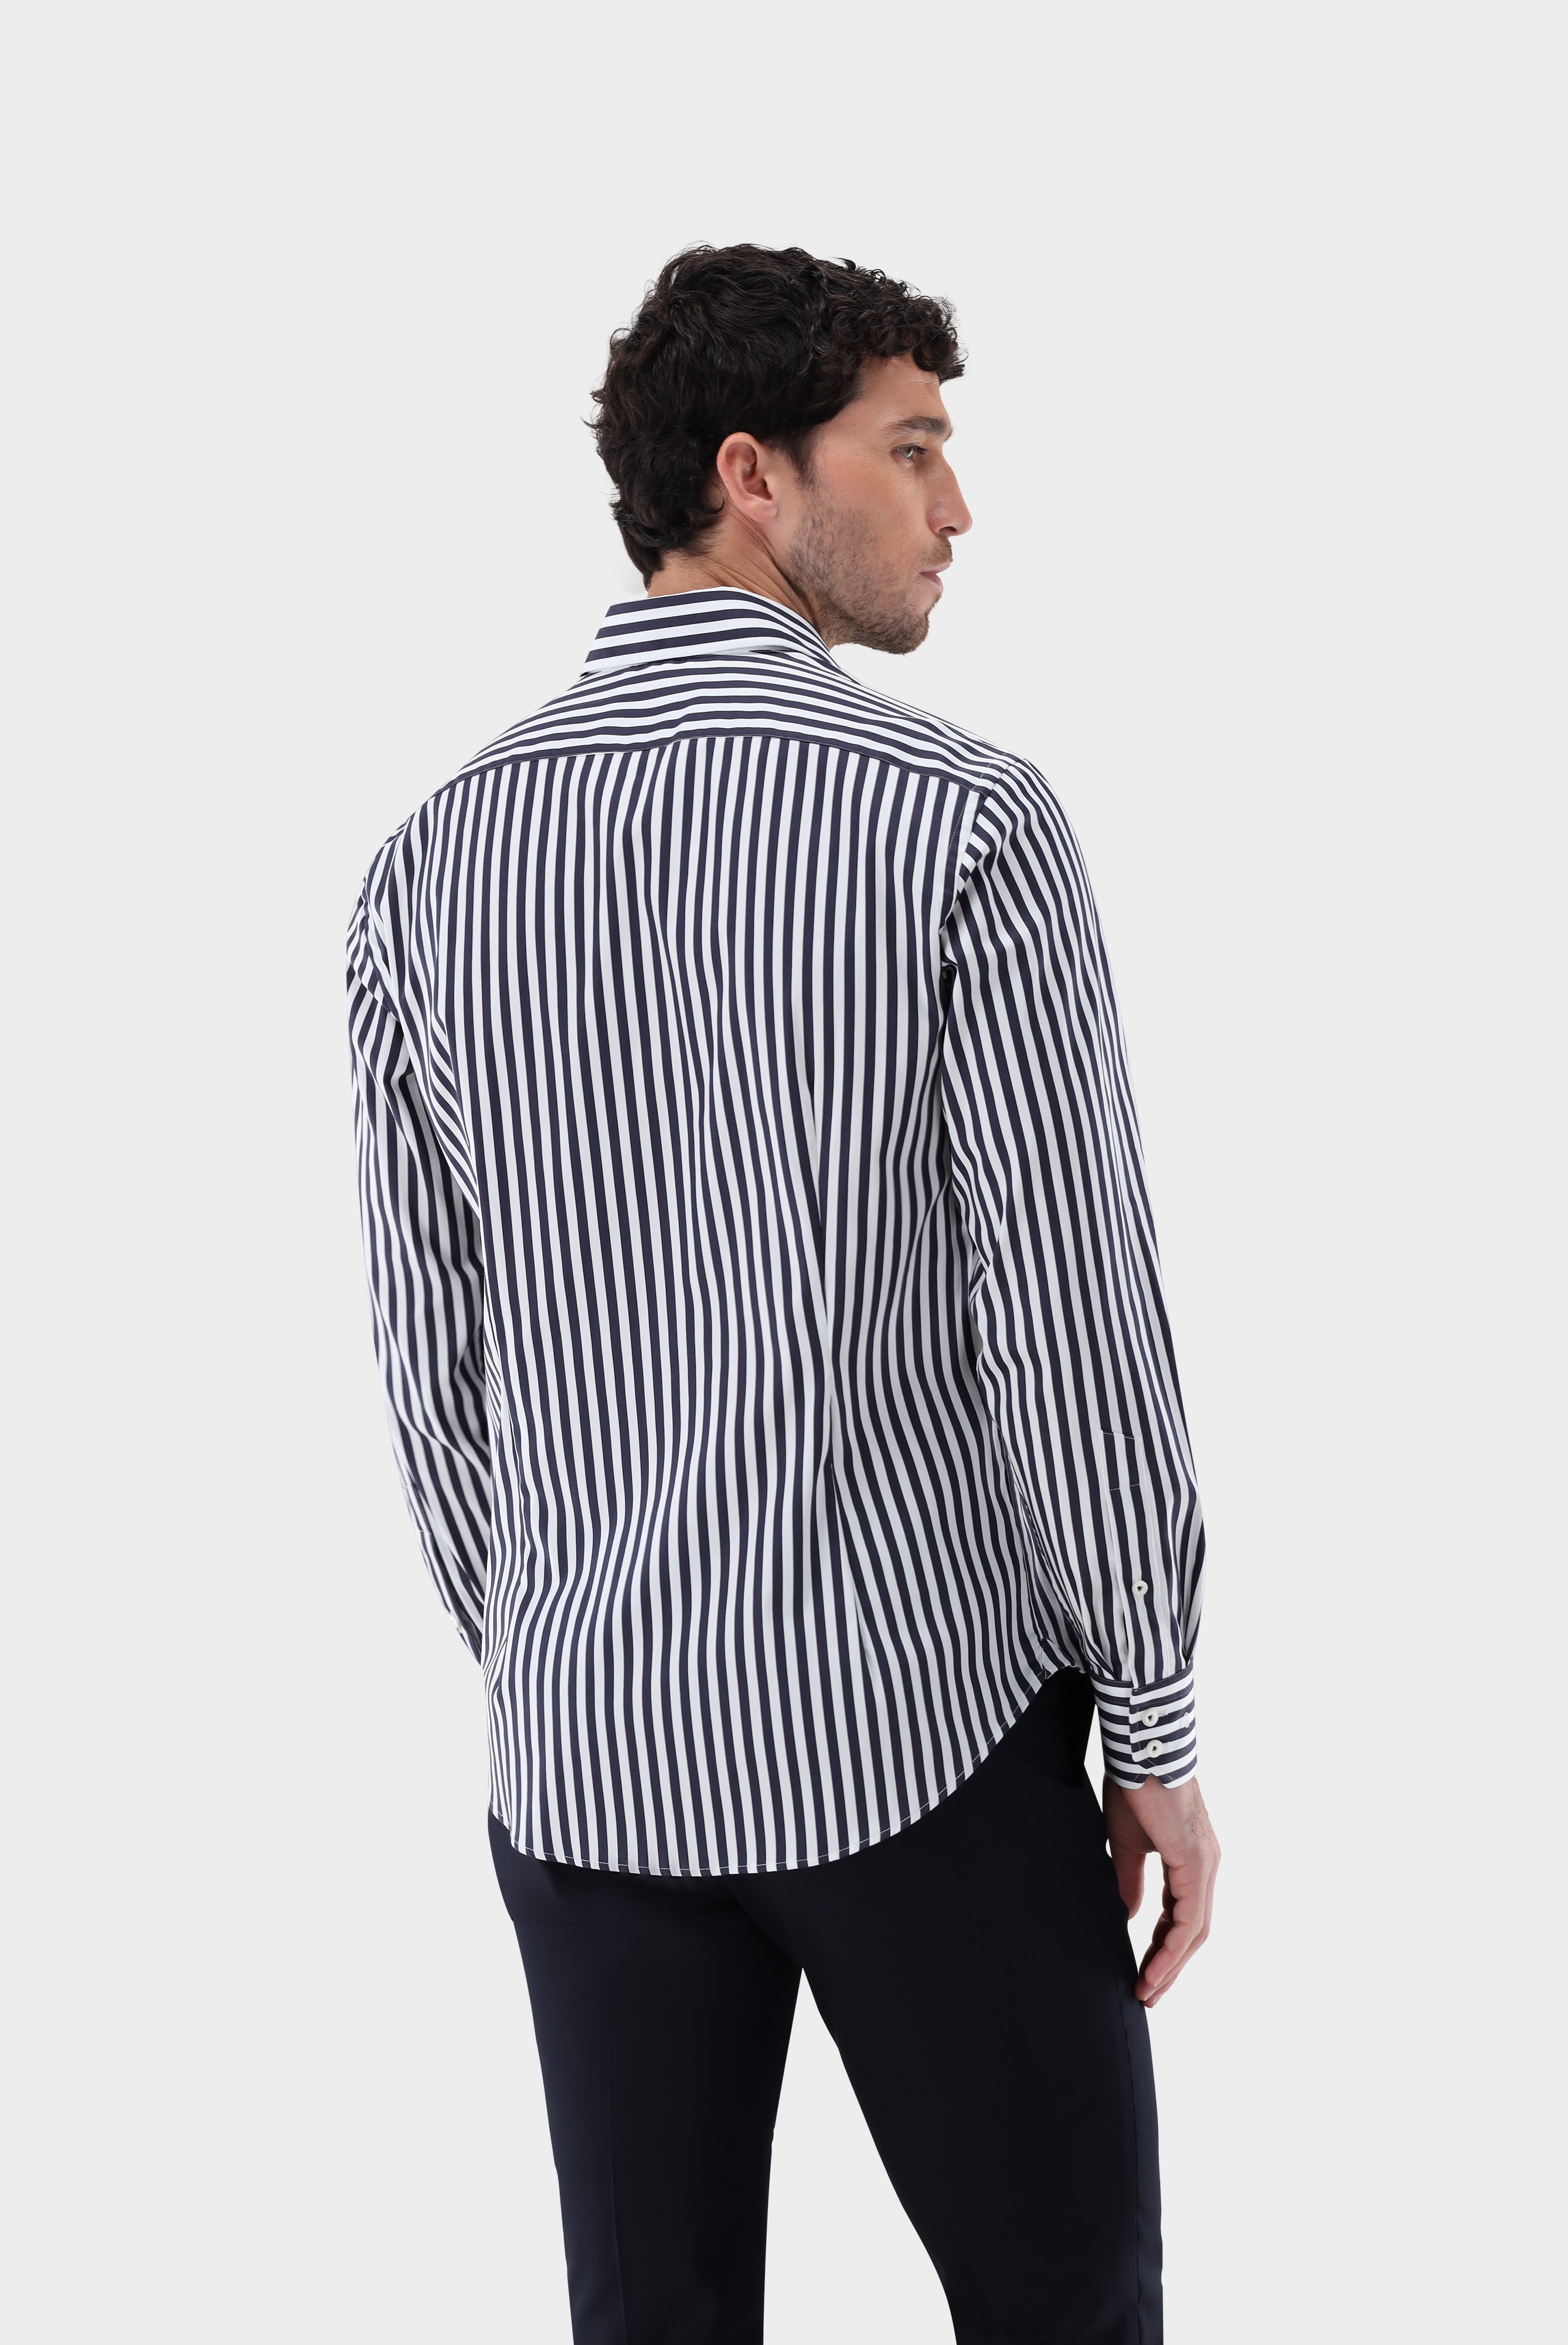 Casual Shirts+Striped Shirt in Cotton Stretch Tailor Fit+20.3283.NV.171959.790.38